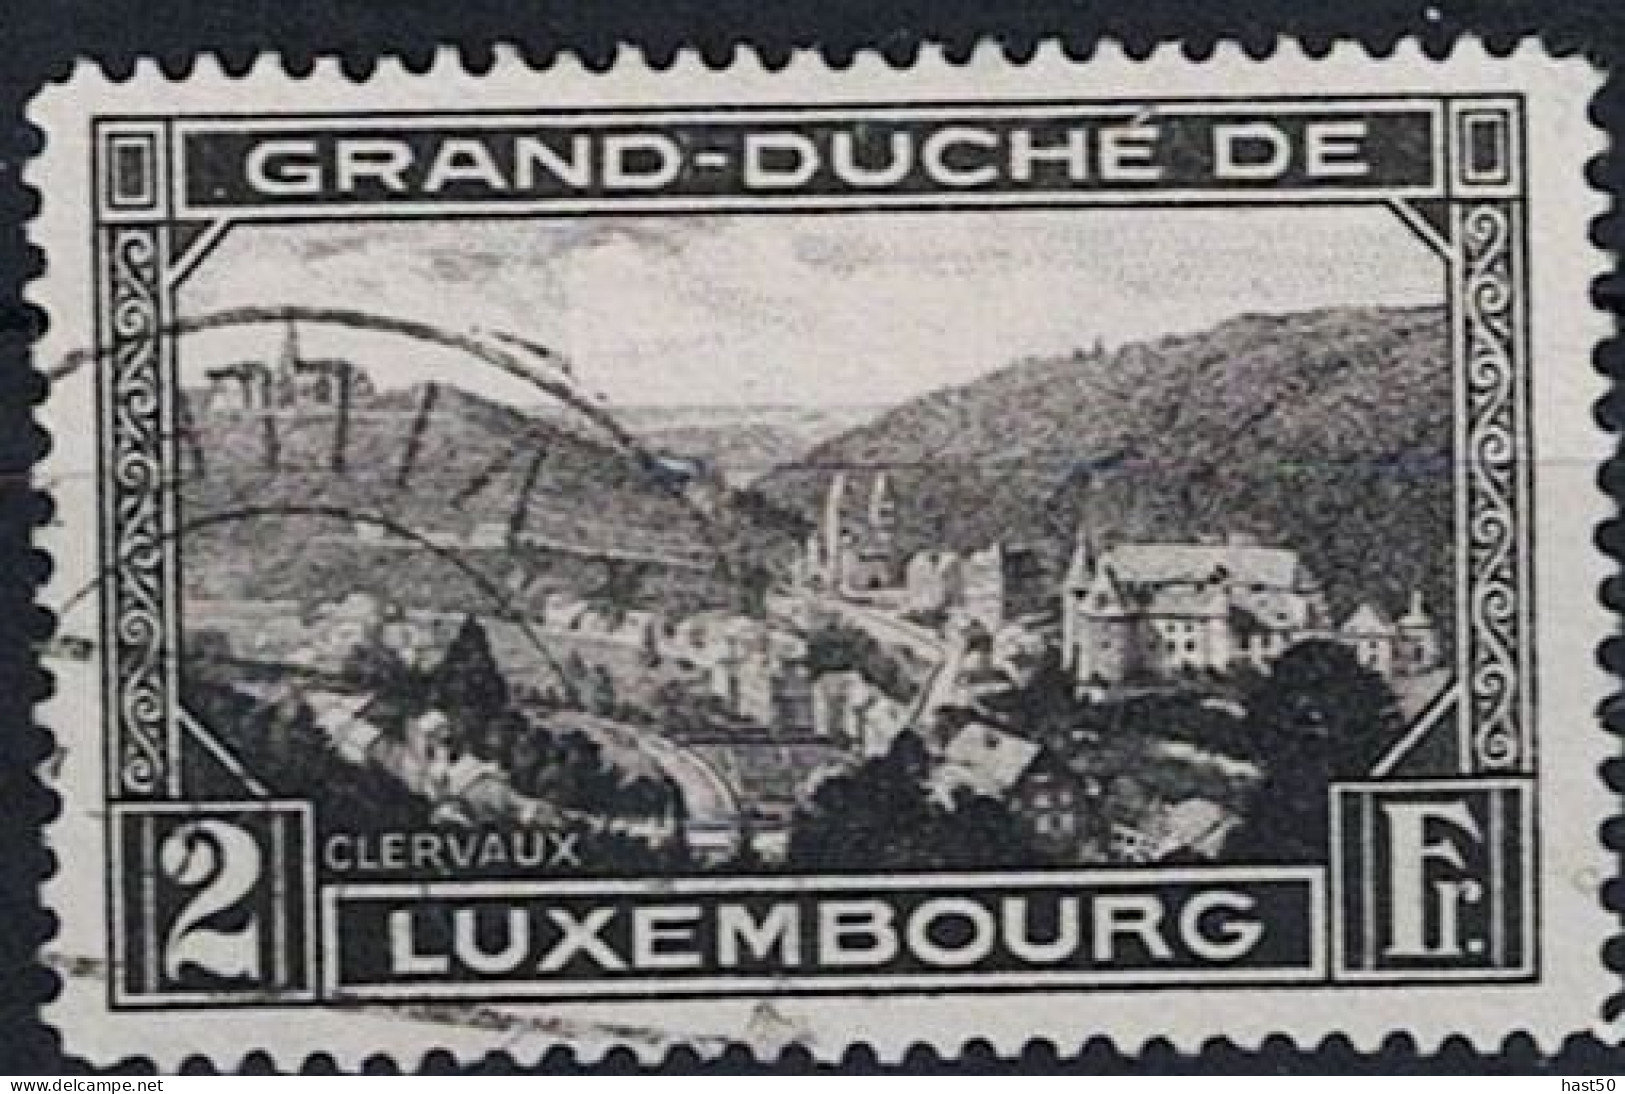 Luxemburg - Clerf (Clervaux) (MiNr: 207) 1928 - Gest Used Obl - Usati